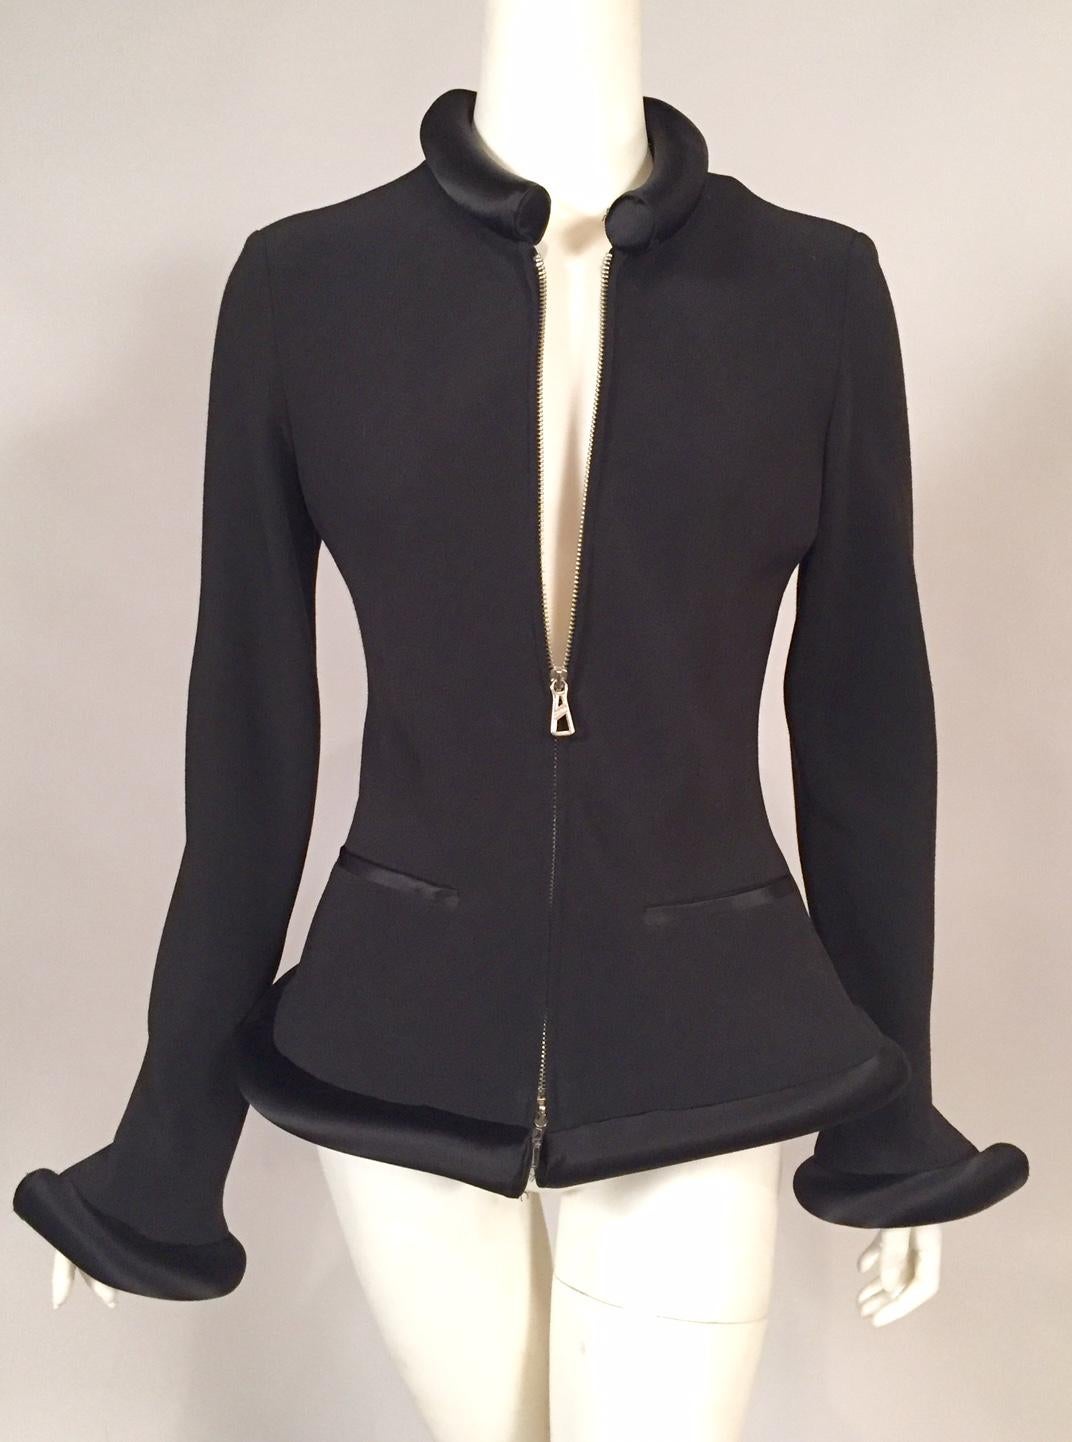 Jean Paul Gaultier Black Jacket with Padded Satin Collar, Cuffs and Hemline 2